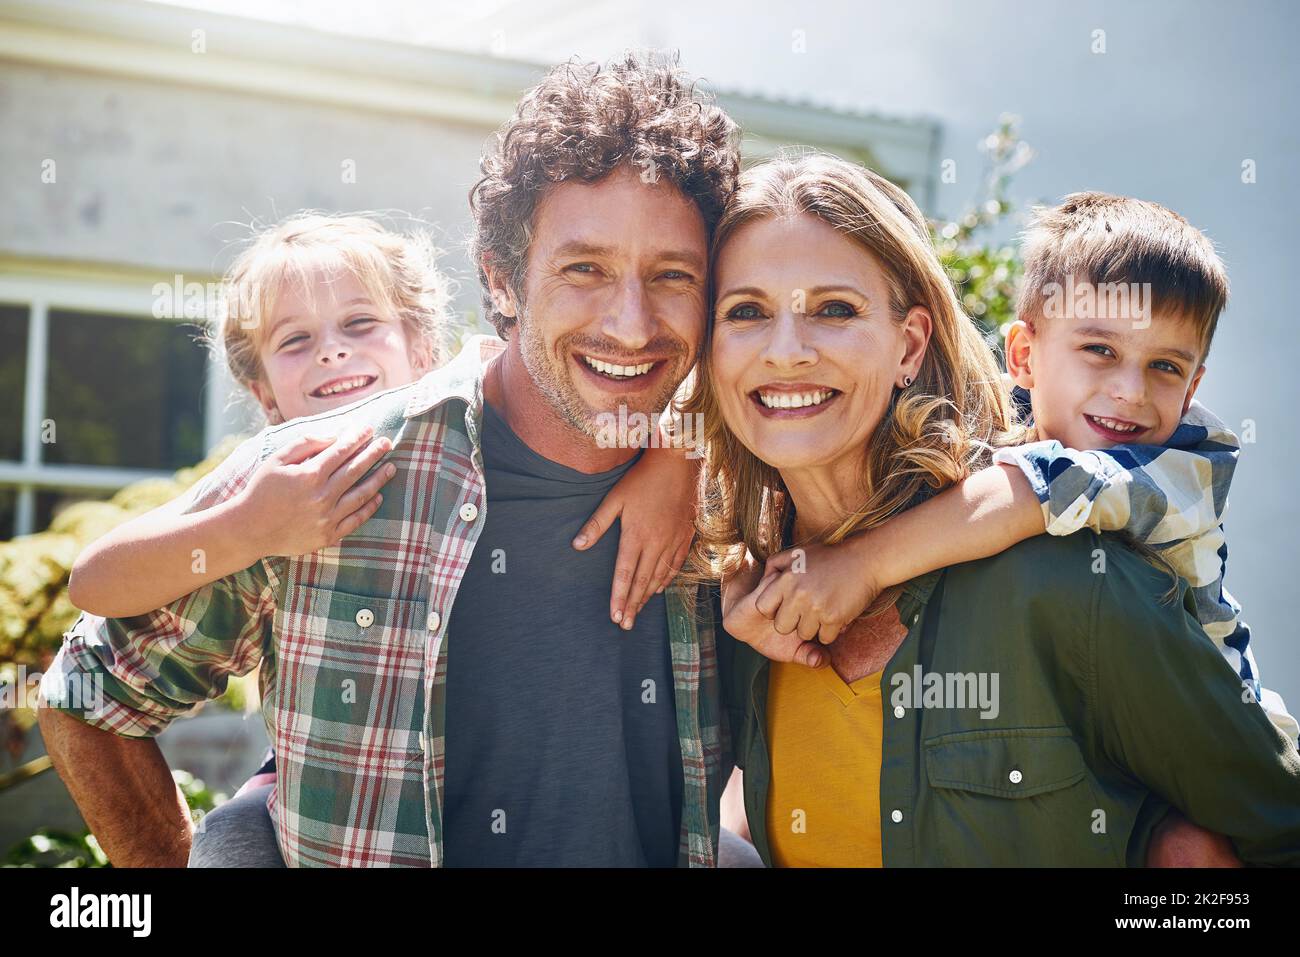 All you need is family to be truly happy. Portrait of a happy family spending time together outdoors. Stock Photo